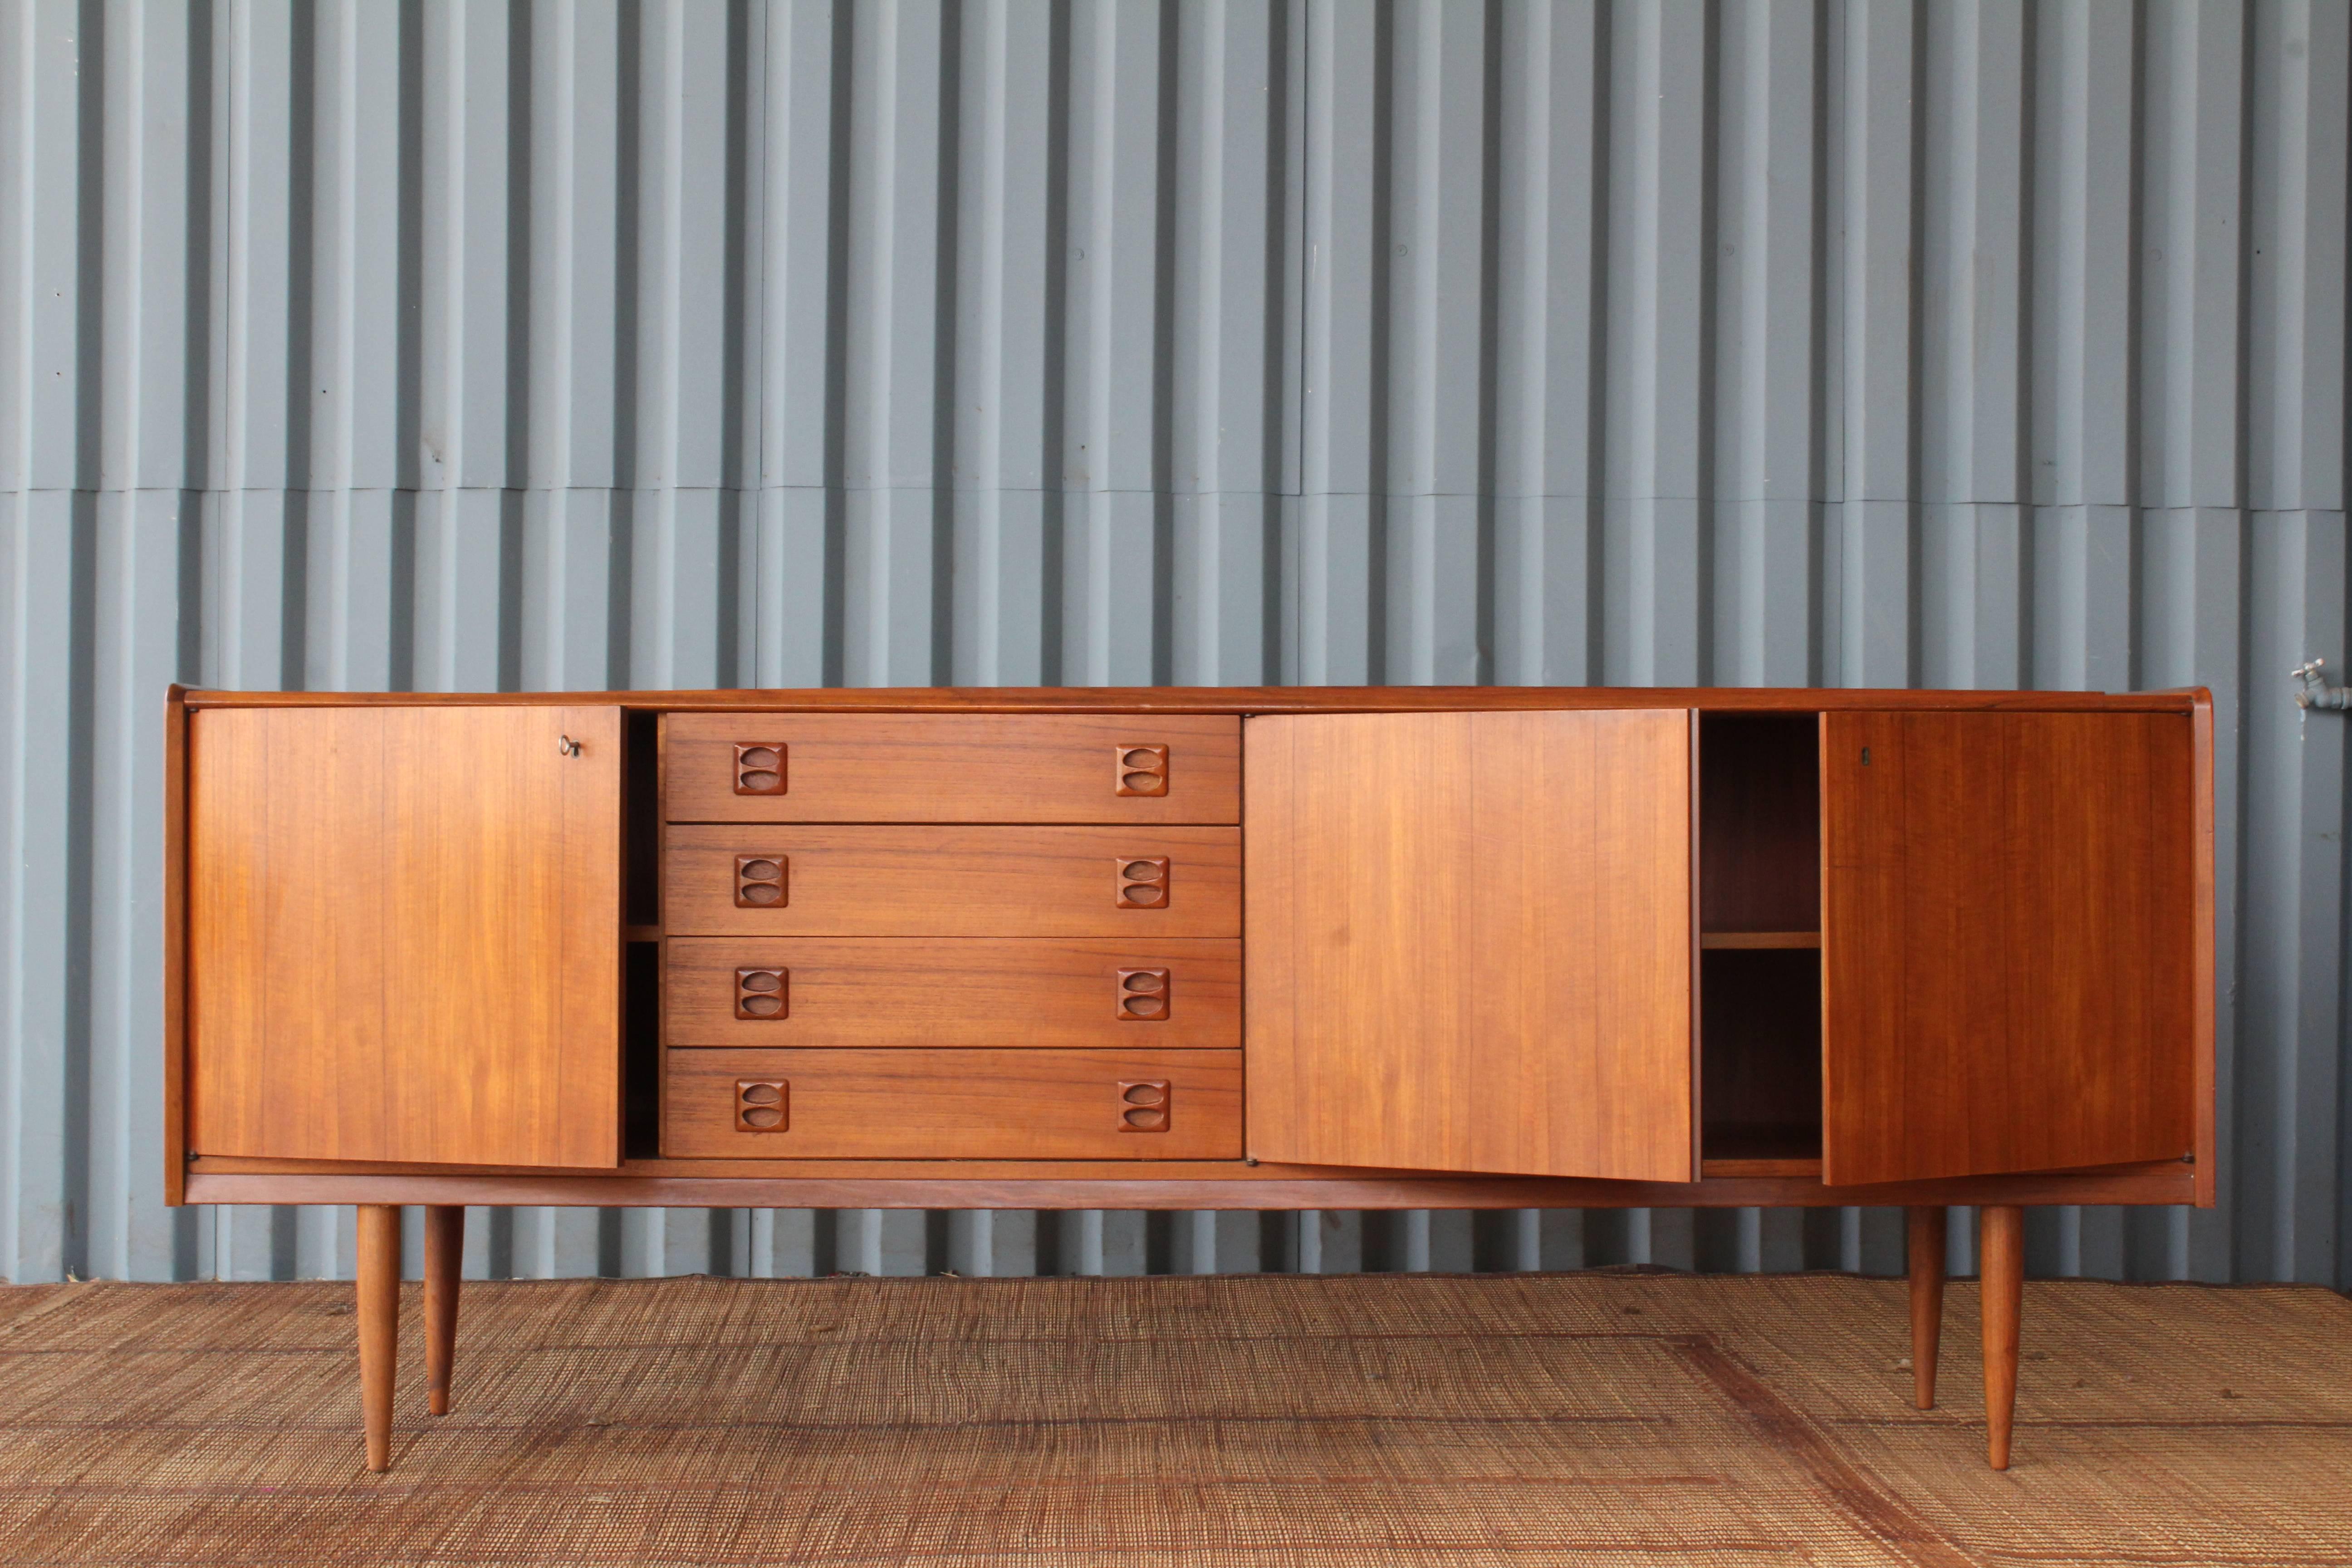 1960s Danish teak credenza. Features two locking doors with the original key and four drawers with sculpted teak pulls.